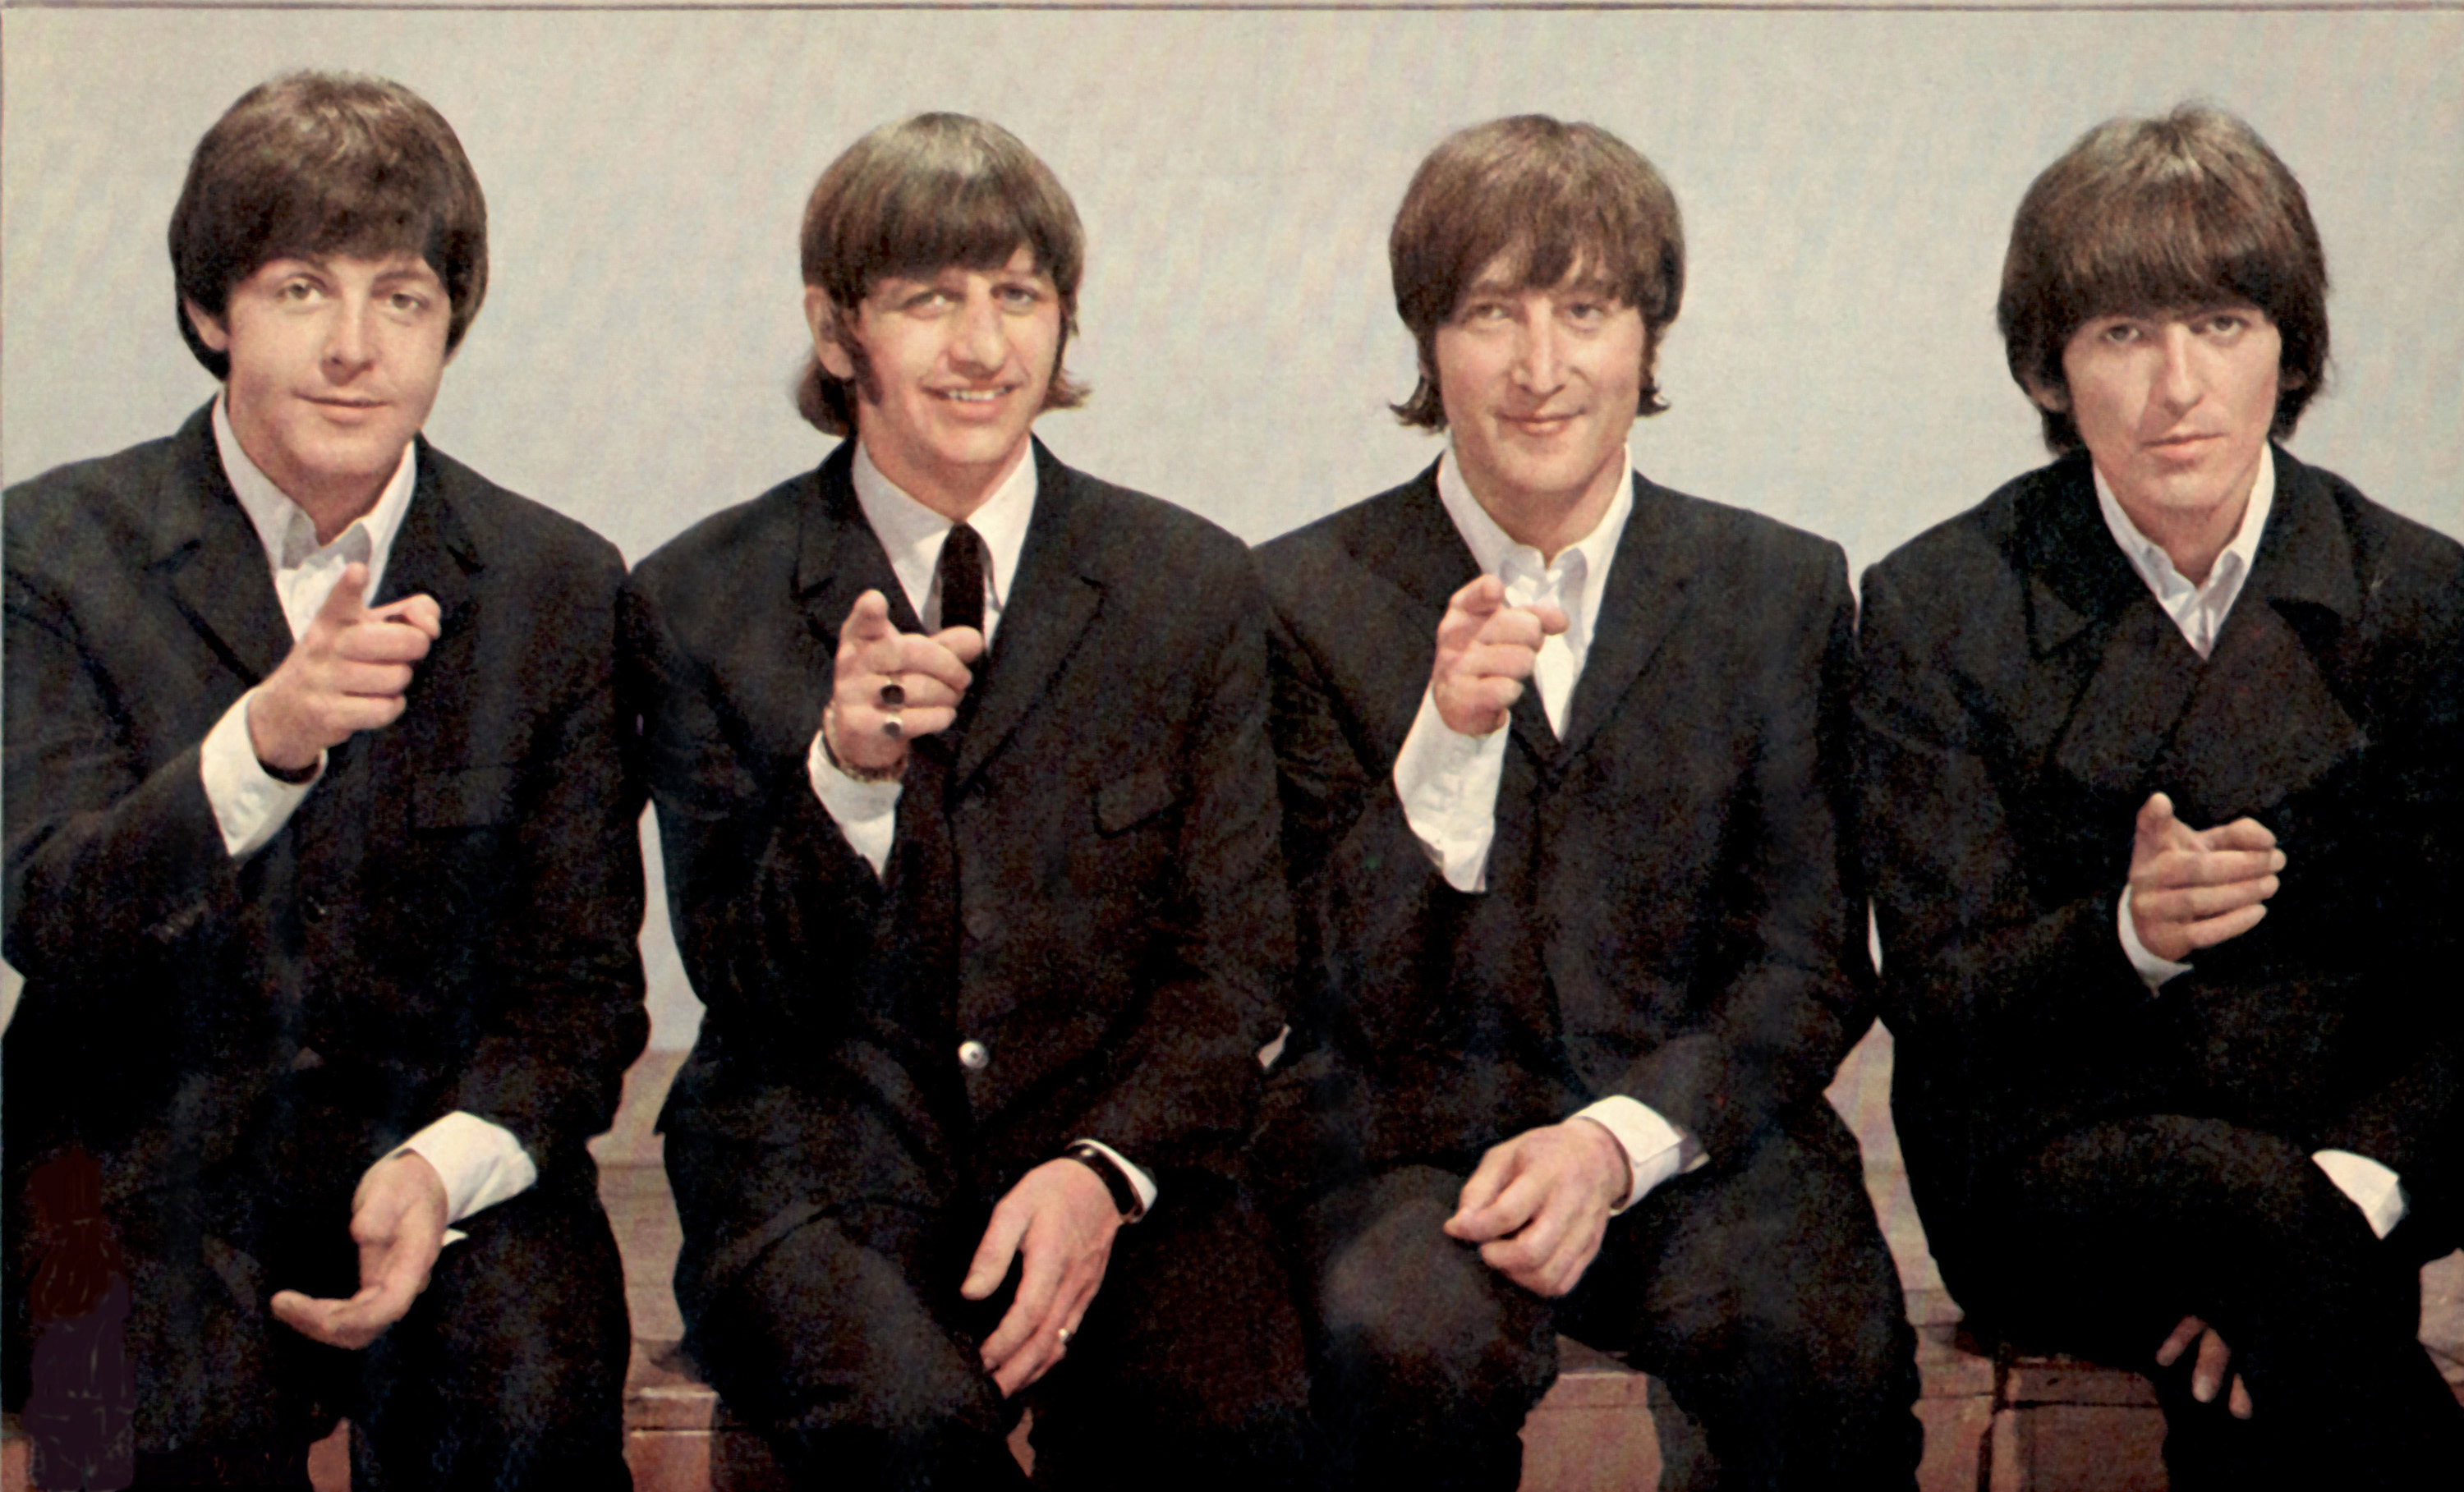 The Beatles File Photos 1960's - 1970's